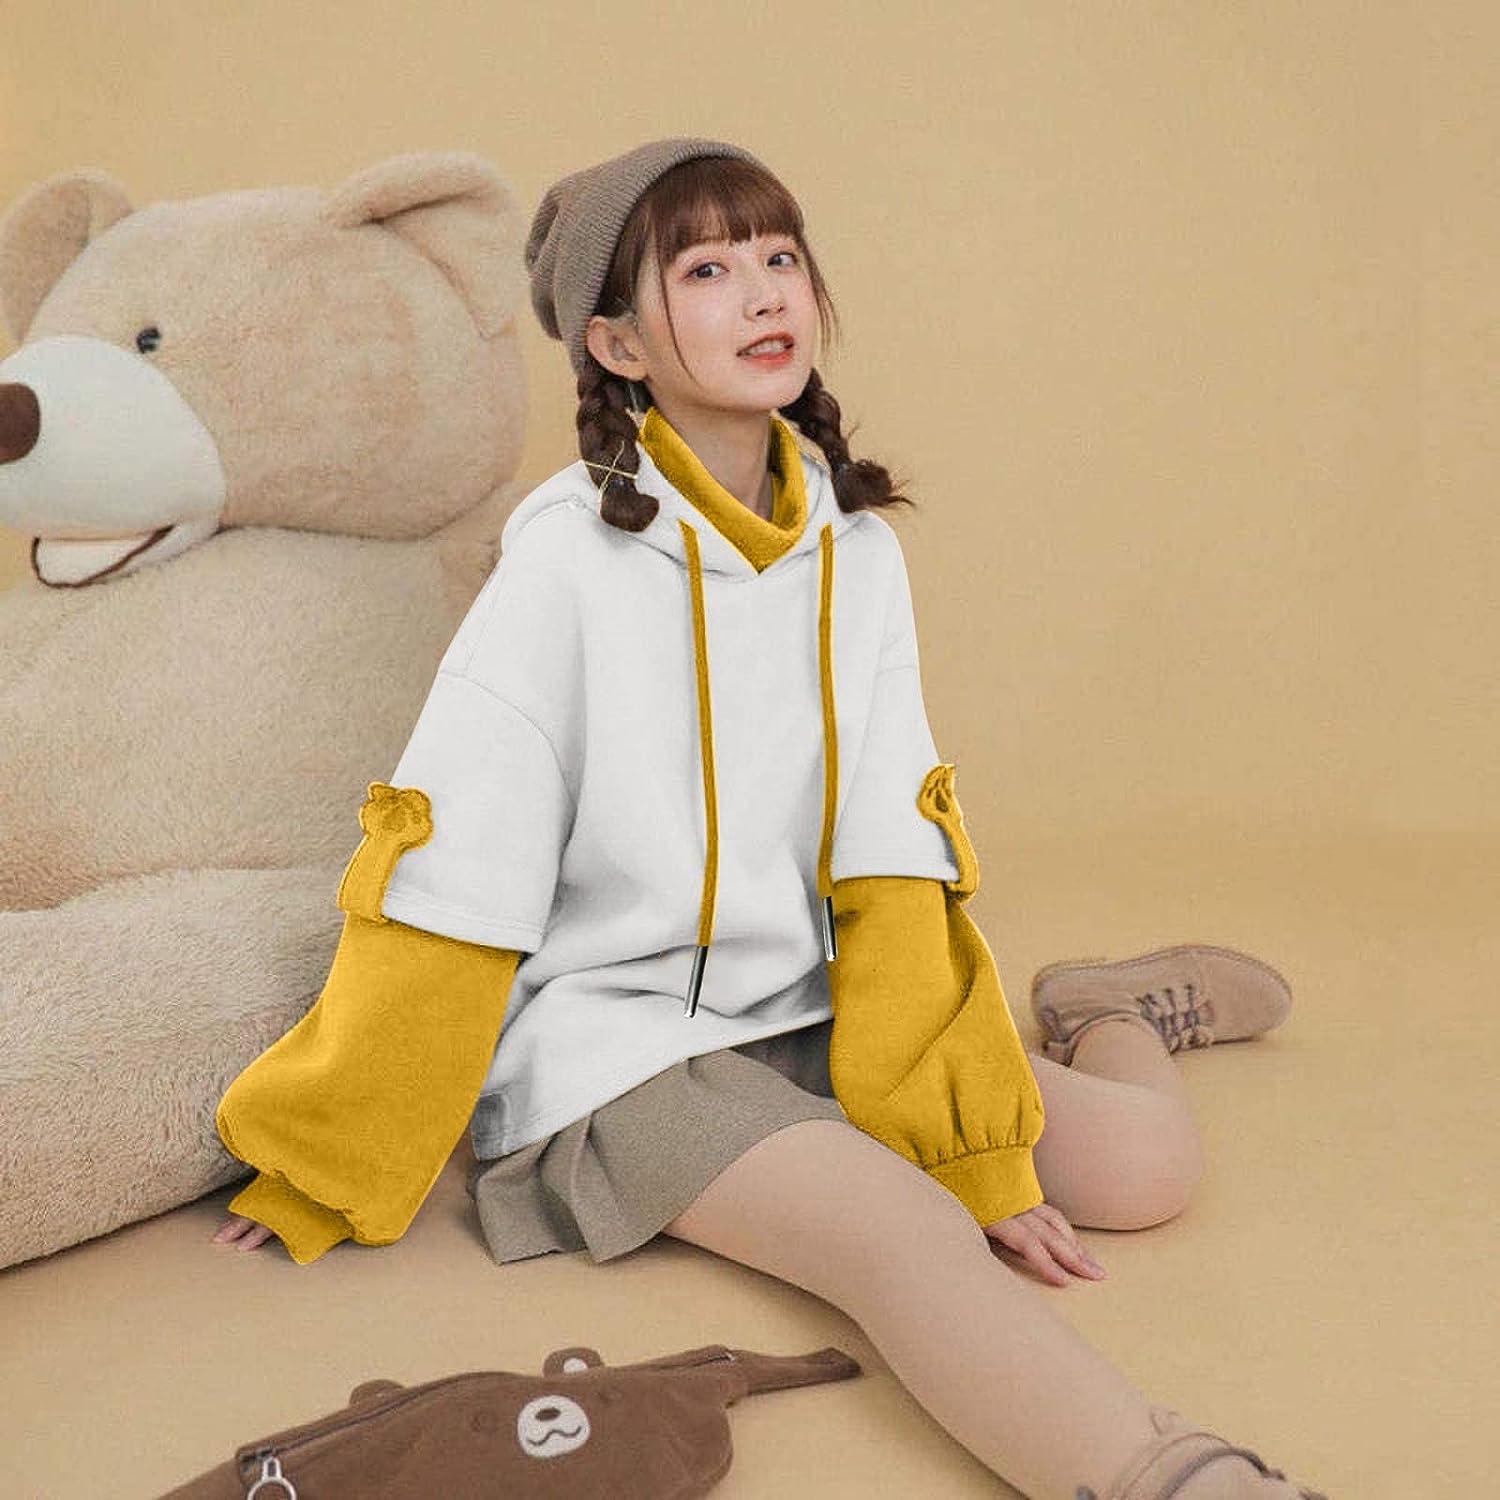 Pullover Hoodie Women Womens Casual Long Sleeve Cute Dinosaur Clothes for under  10 Dollars for Women Casual Sweatshirt Women